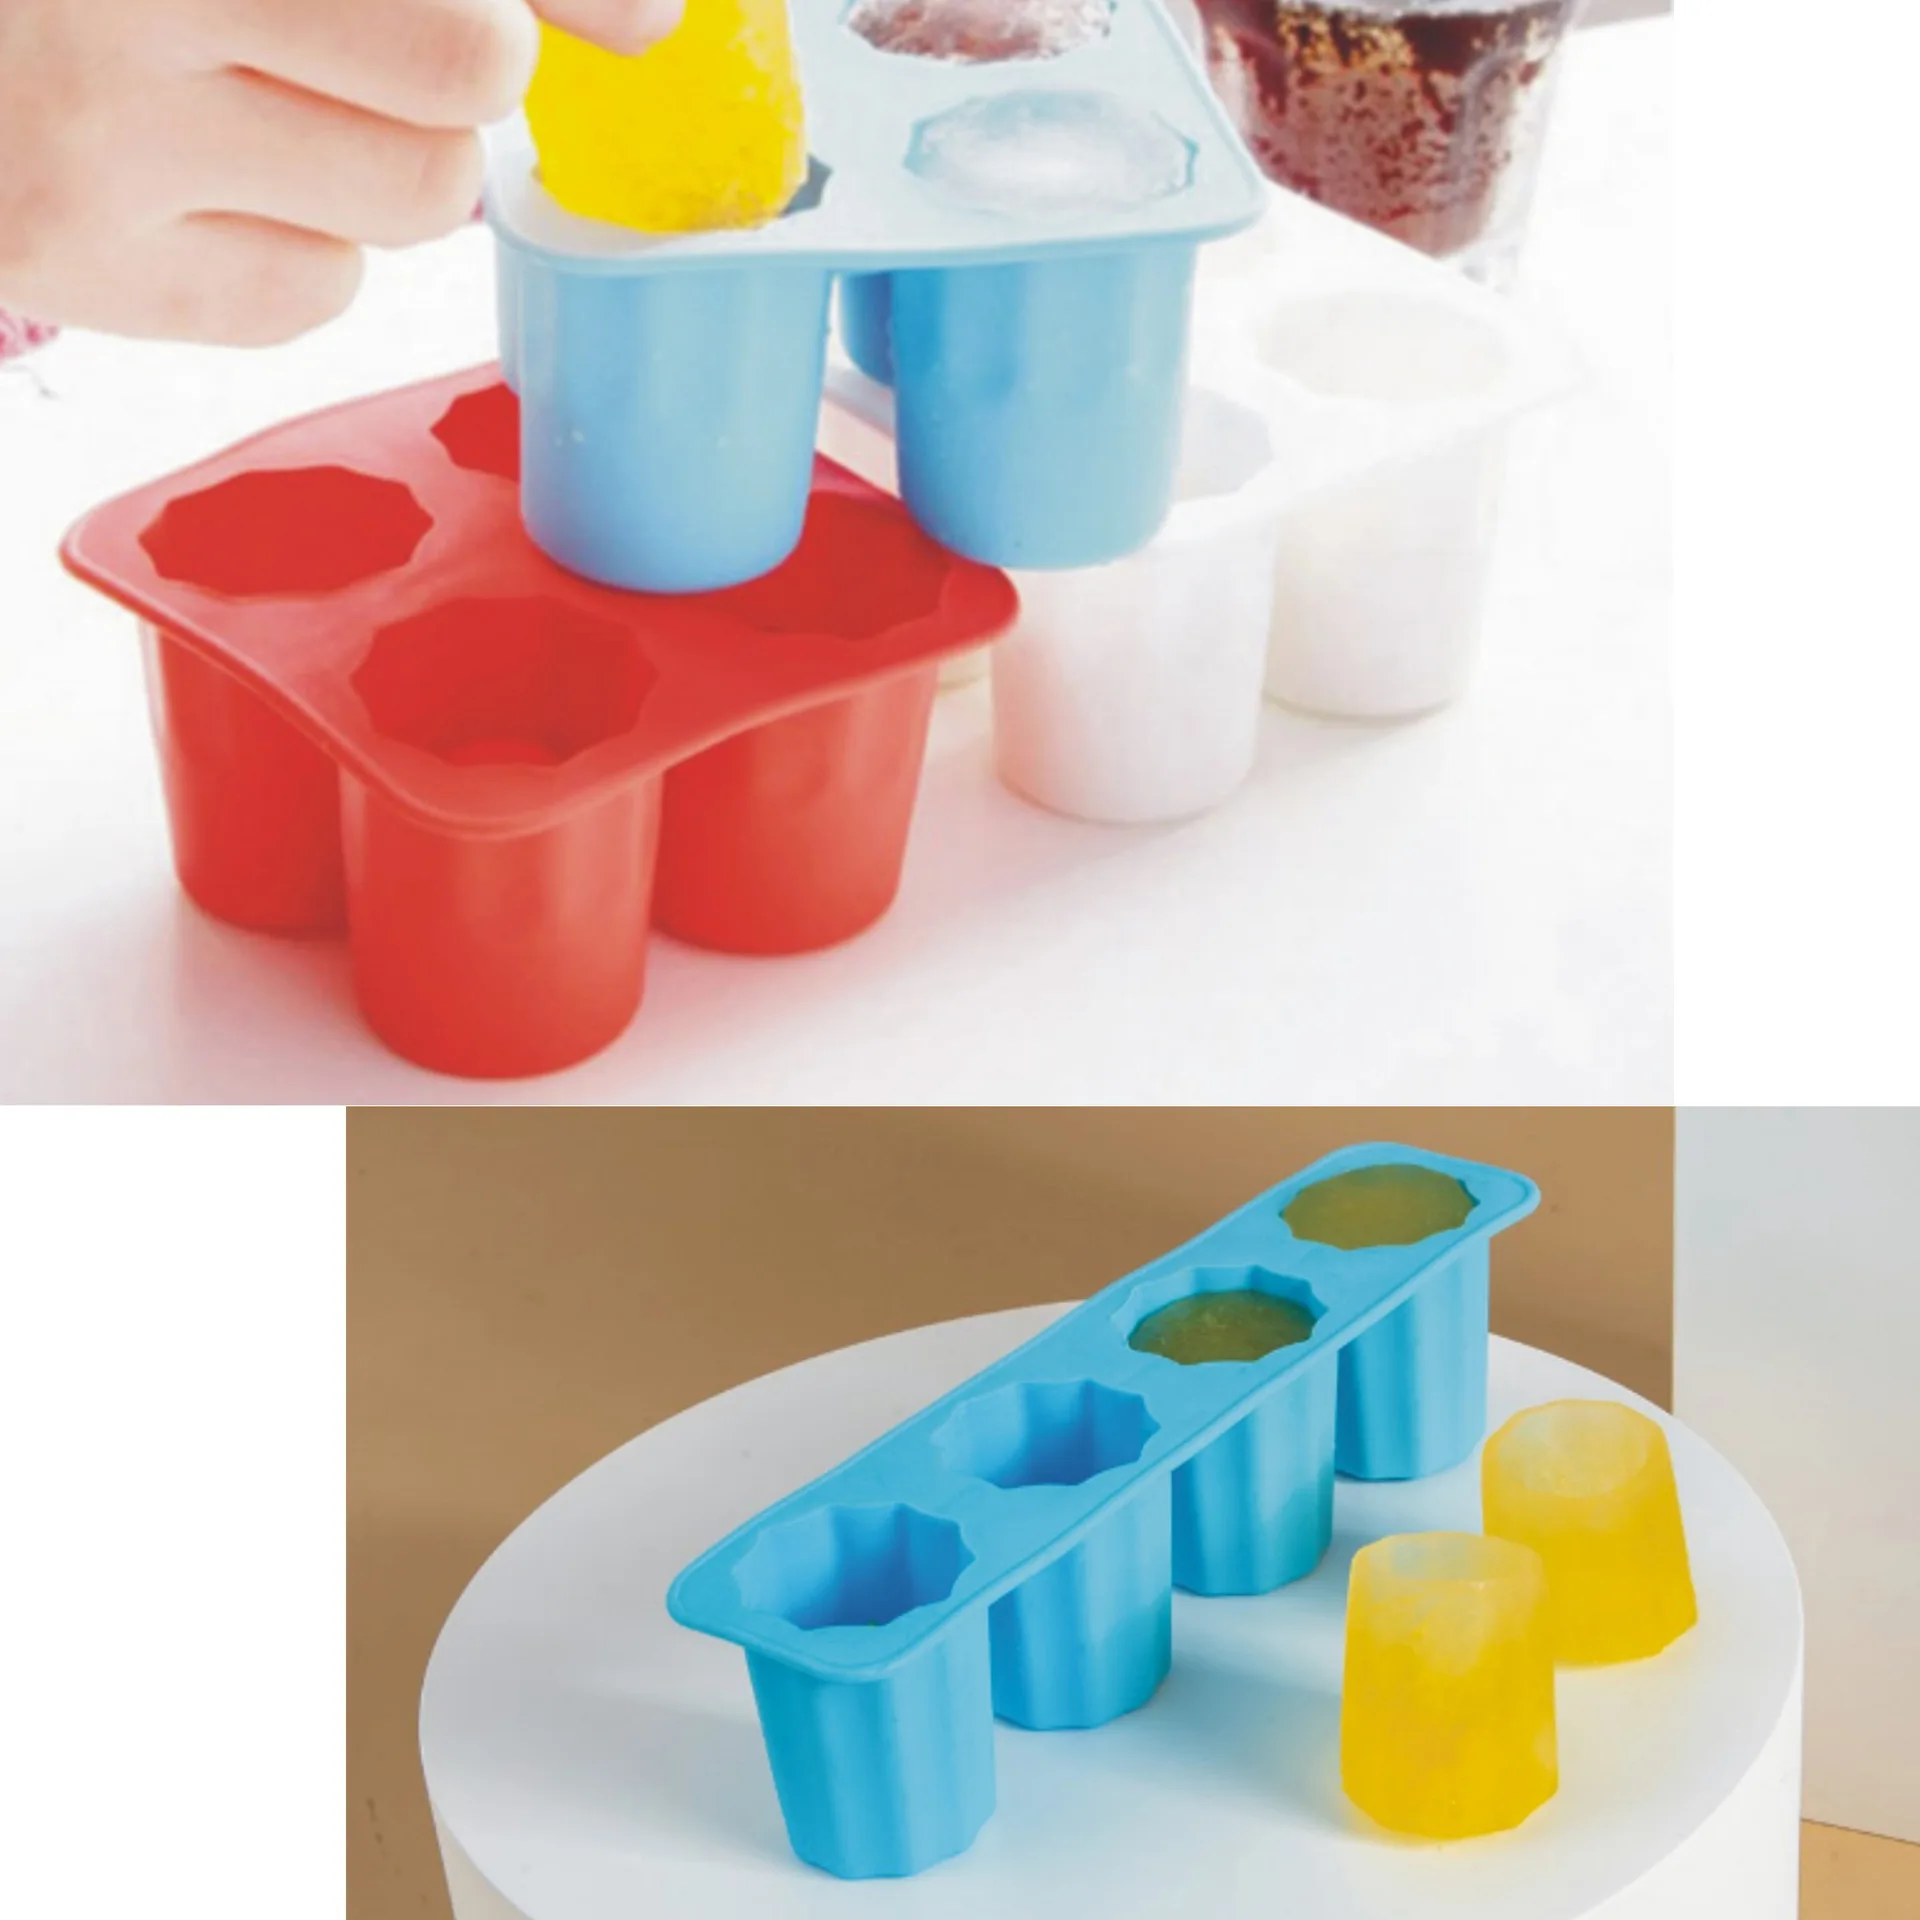 https://ae01.alicdn.com/kf/S25af761b60d04e078c053476b1ad382dq/4-Grids-Hollow-Ice-Cube-Silicone-Ice-Tray-For-Making-Waterfall-Iced-Cafe-Americano-Creative-Ice.jpg